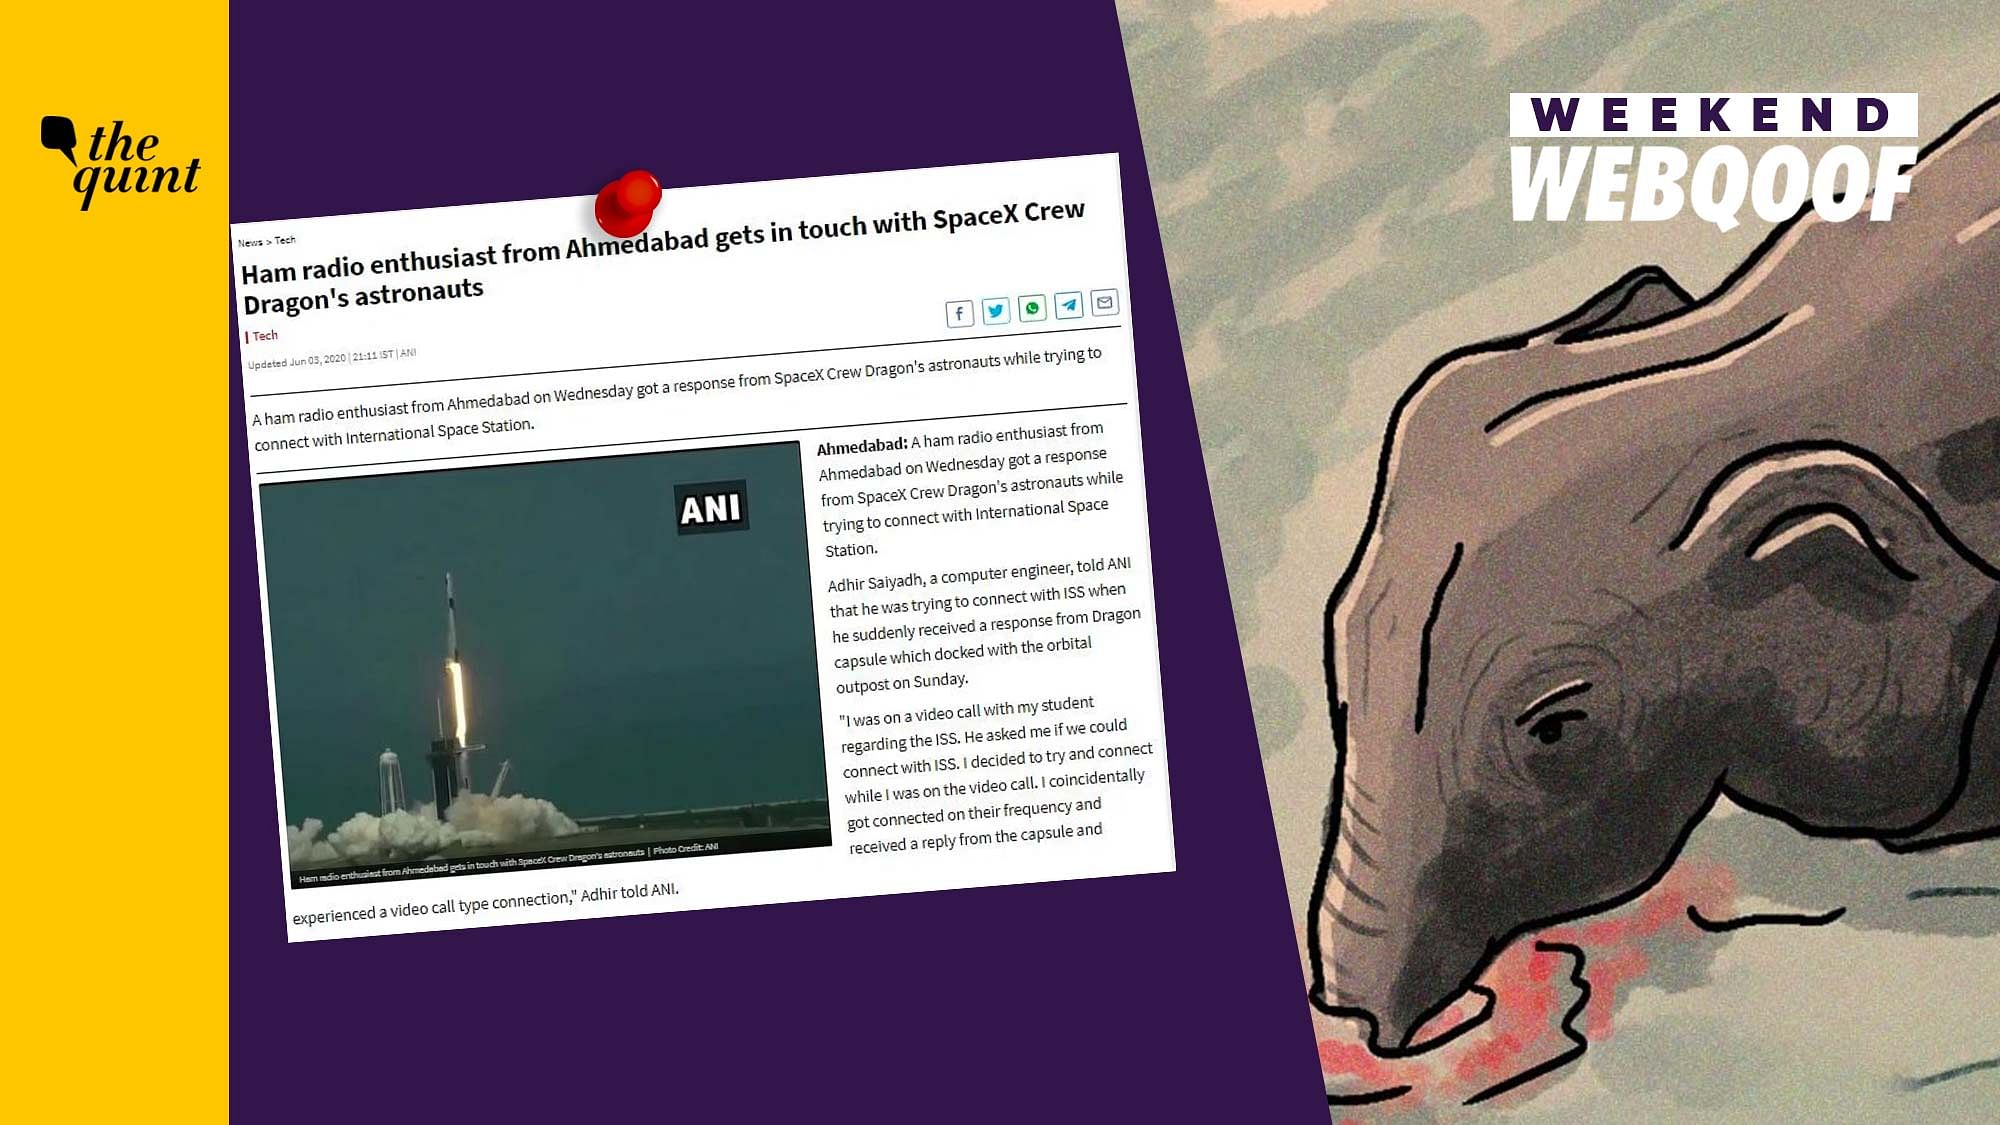 Here’s a quick round-up of the WhatsApp forwards and fake tweets that misled the public this week.